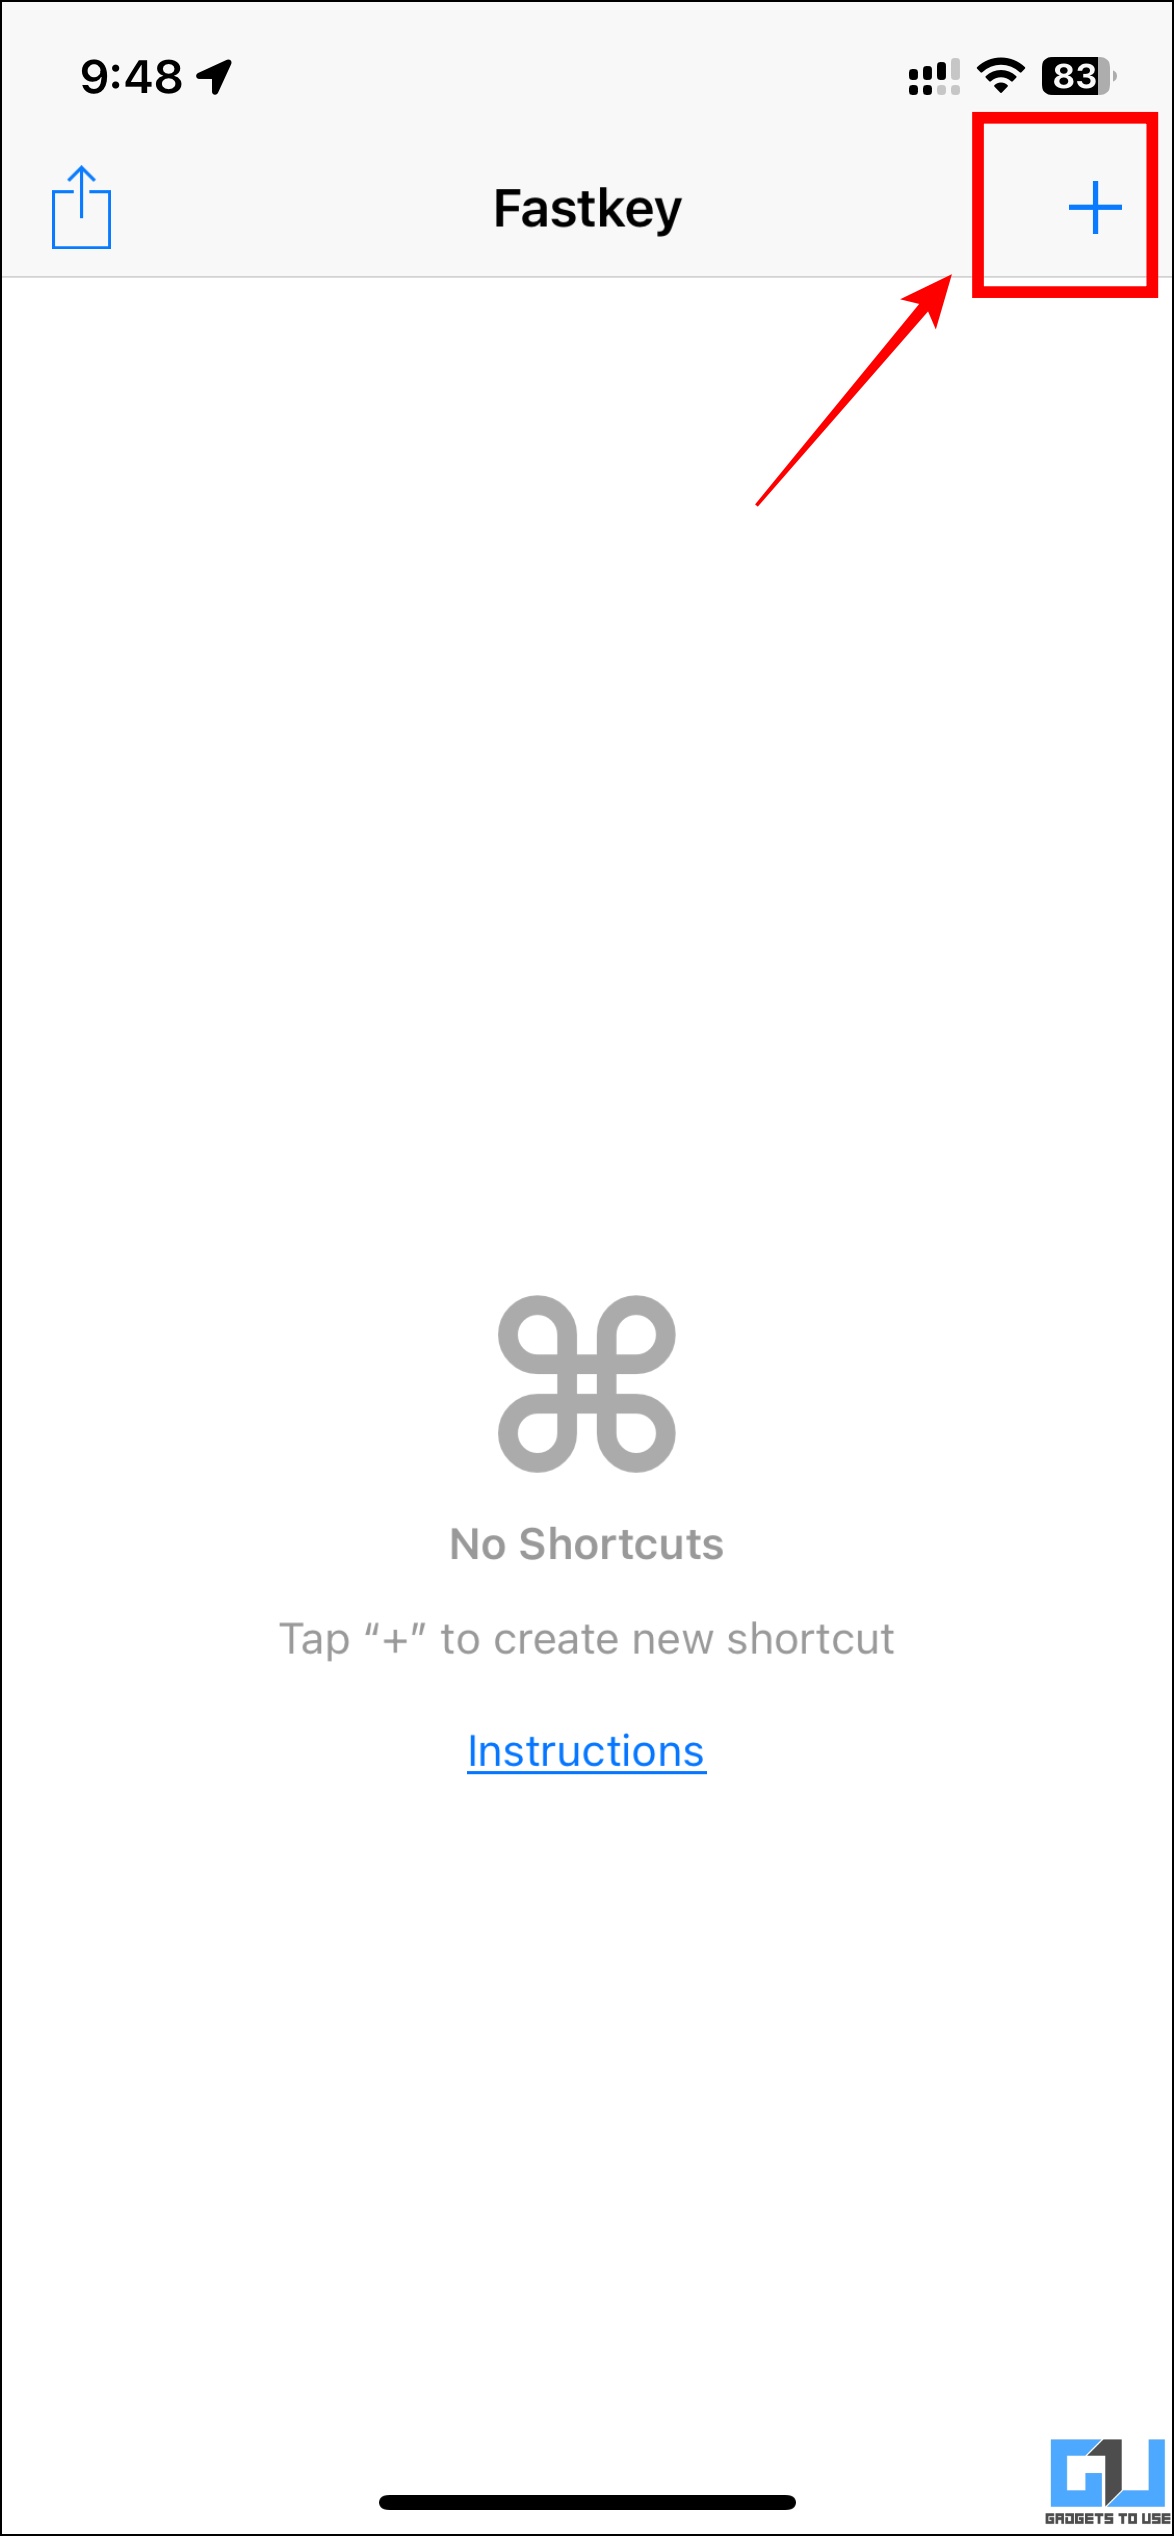 02.2 Icon to add shortcut